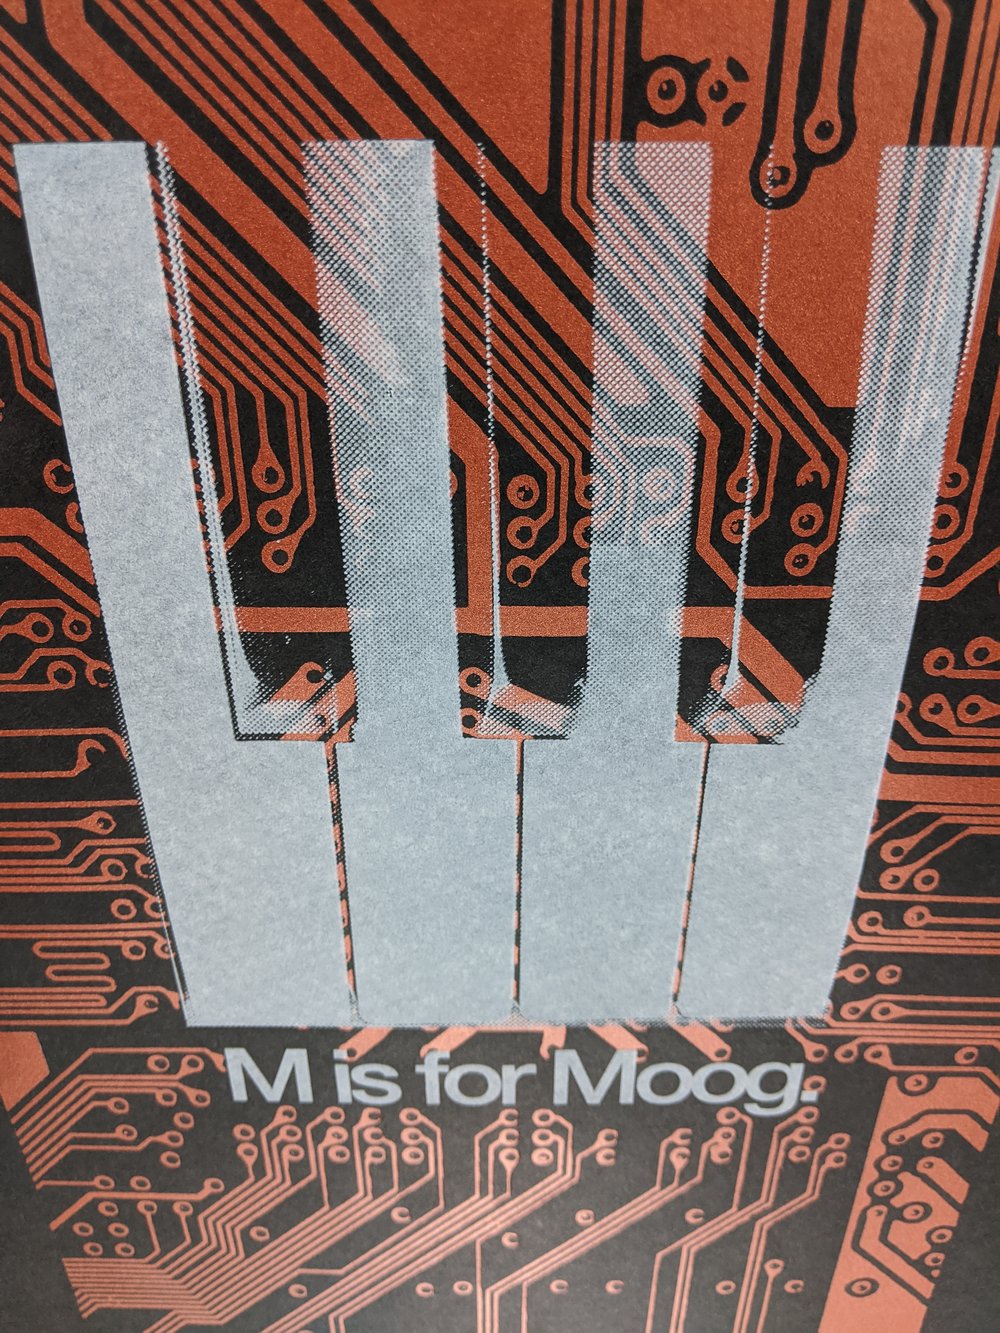 "M is for Moog" (Copper Edition)